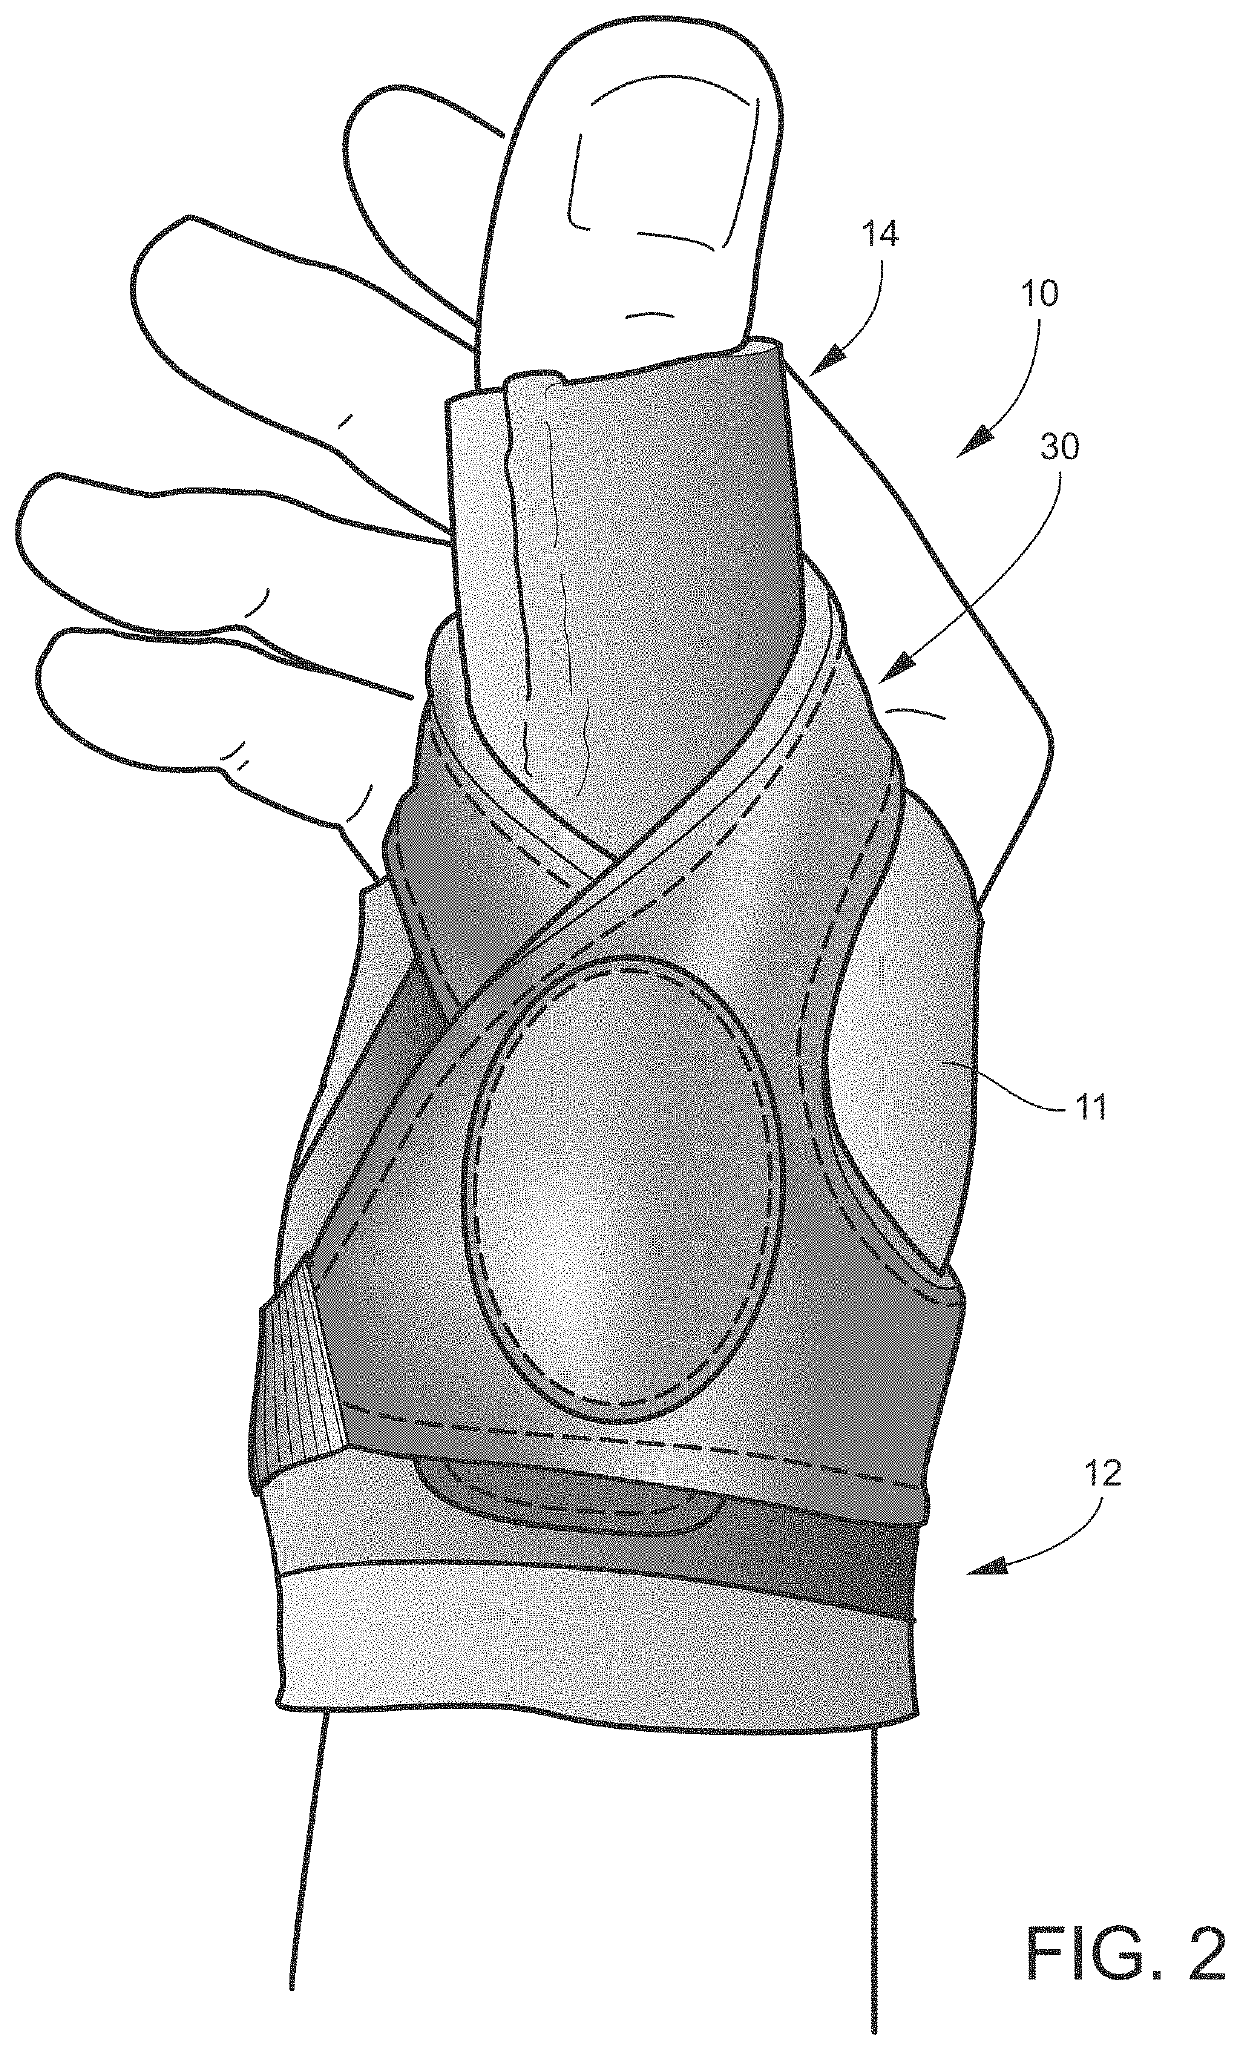 Orthopedic thumb splint and method for stabilizing the trapeziometacarpal joint of a user